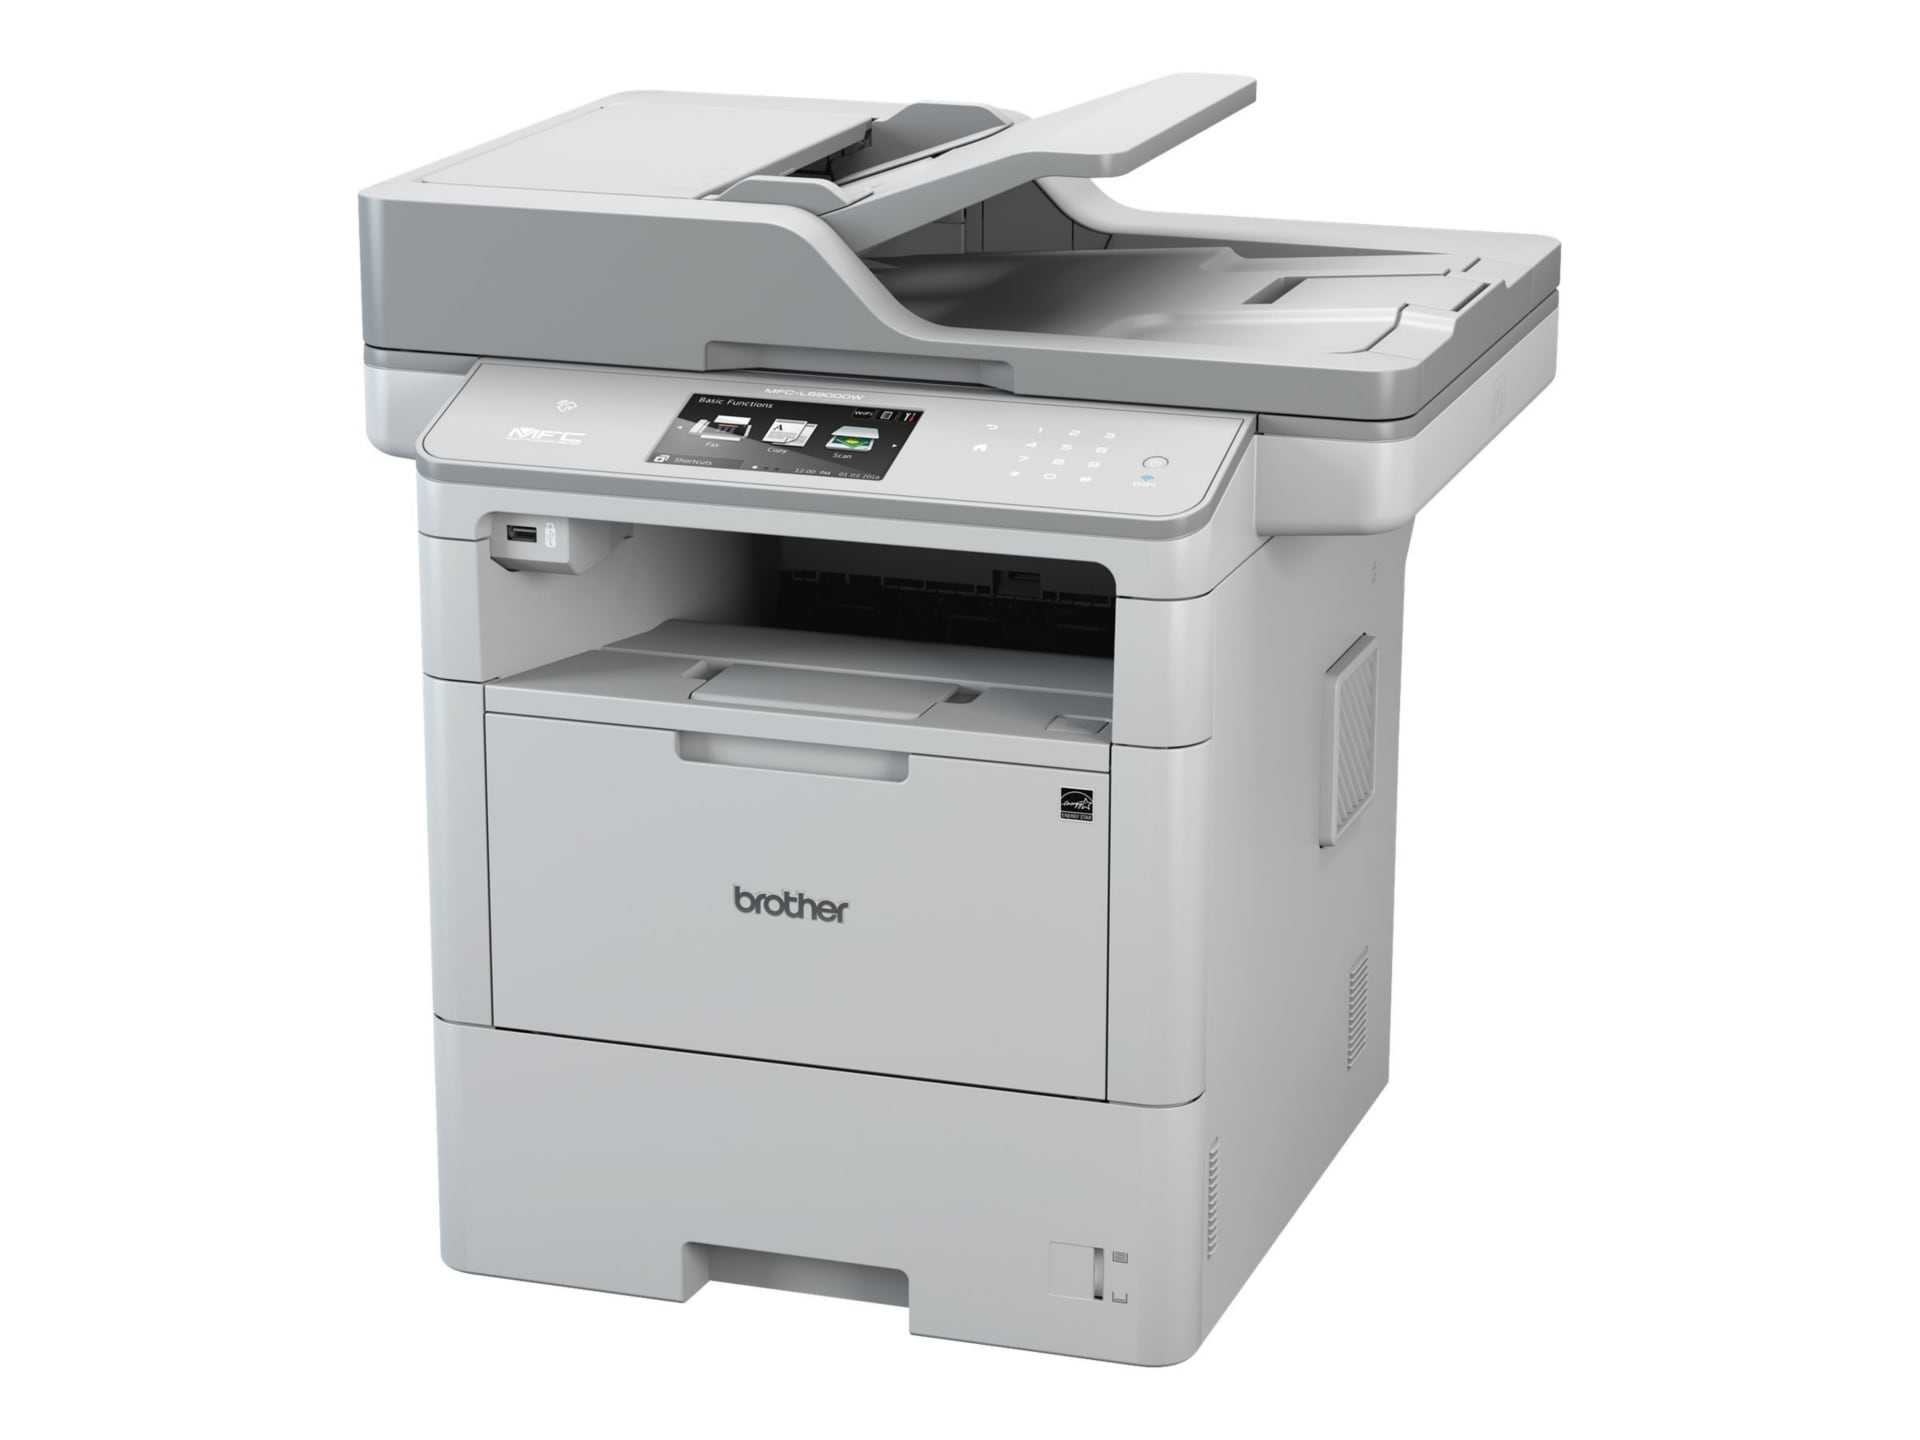 Brother MFC-L6800DW Printer Review: Small Buisness Printing